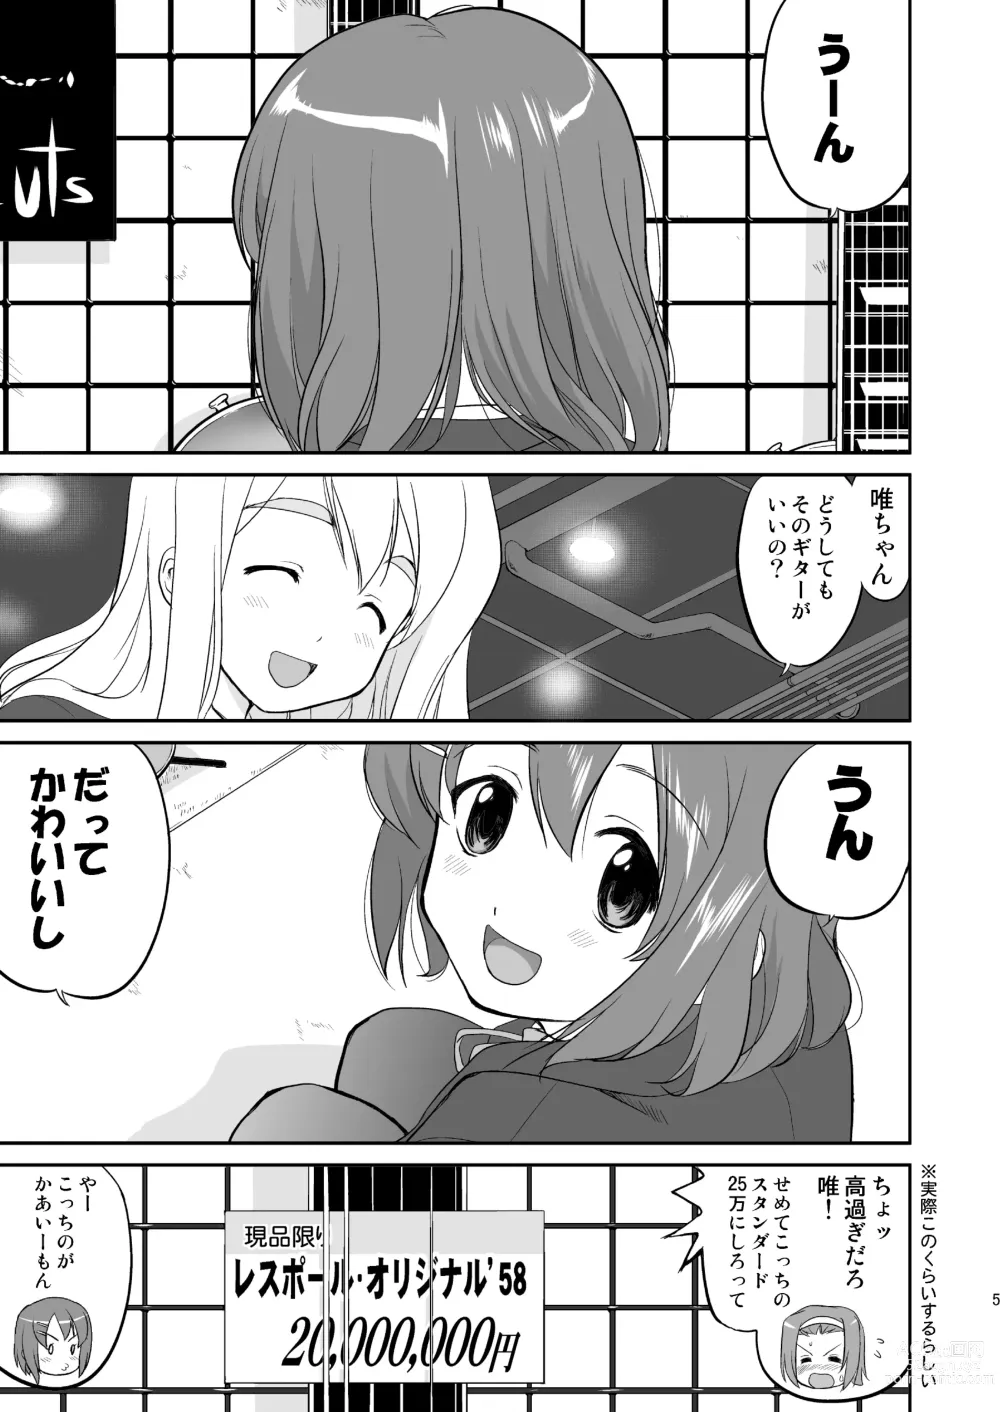 Page 5 of doujinshi K-ON Trilogy